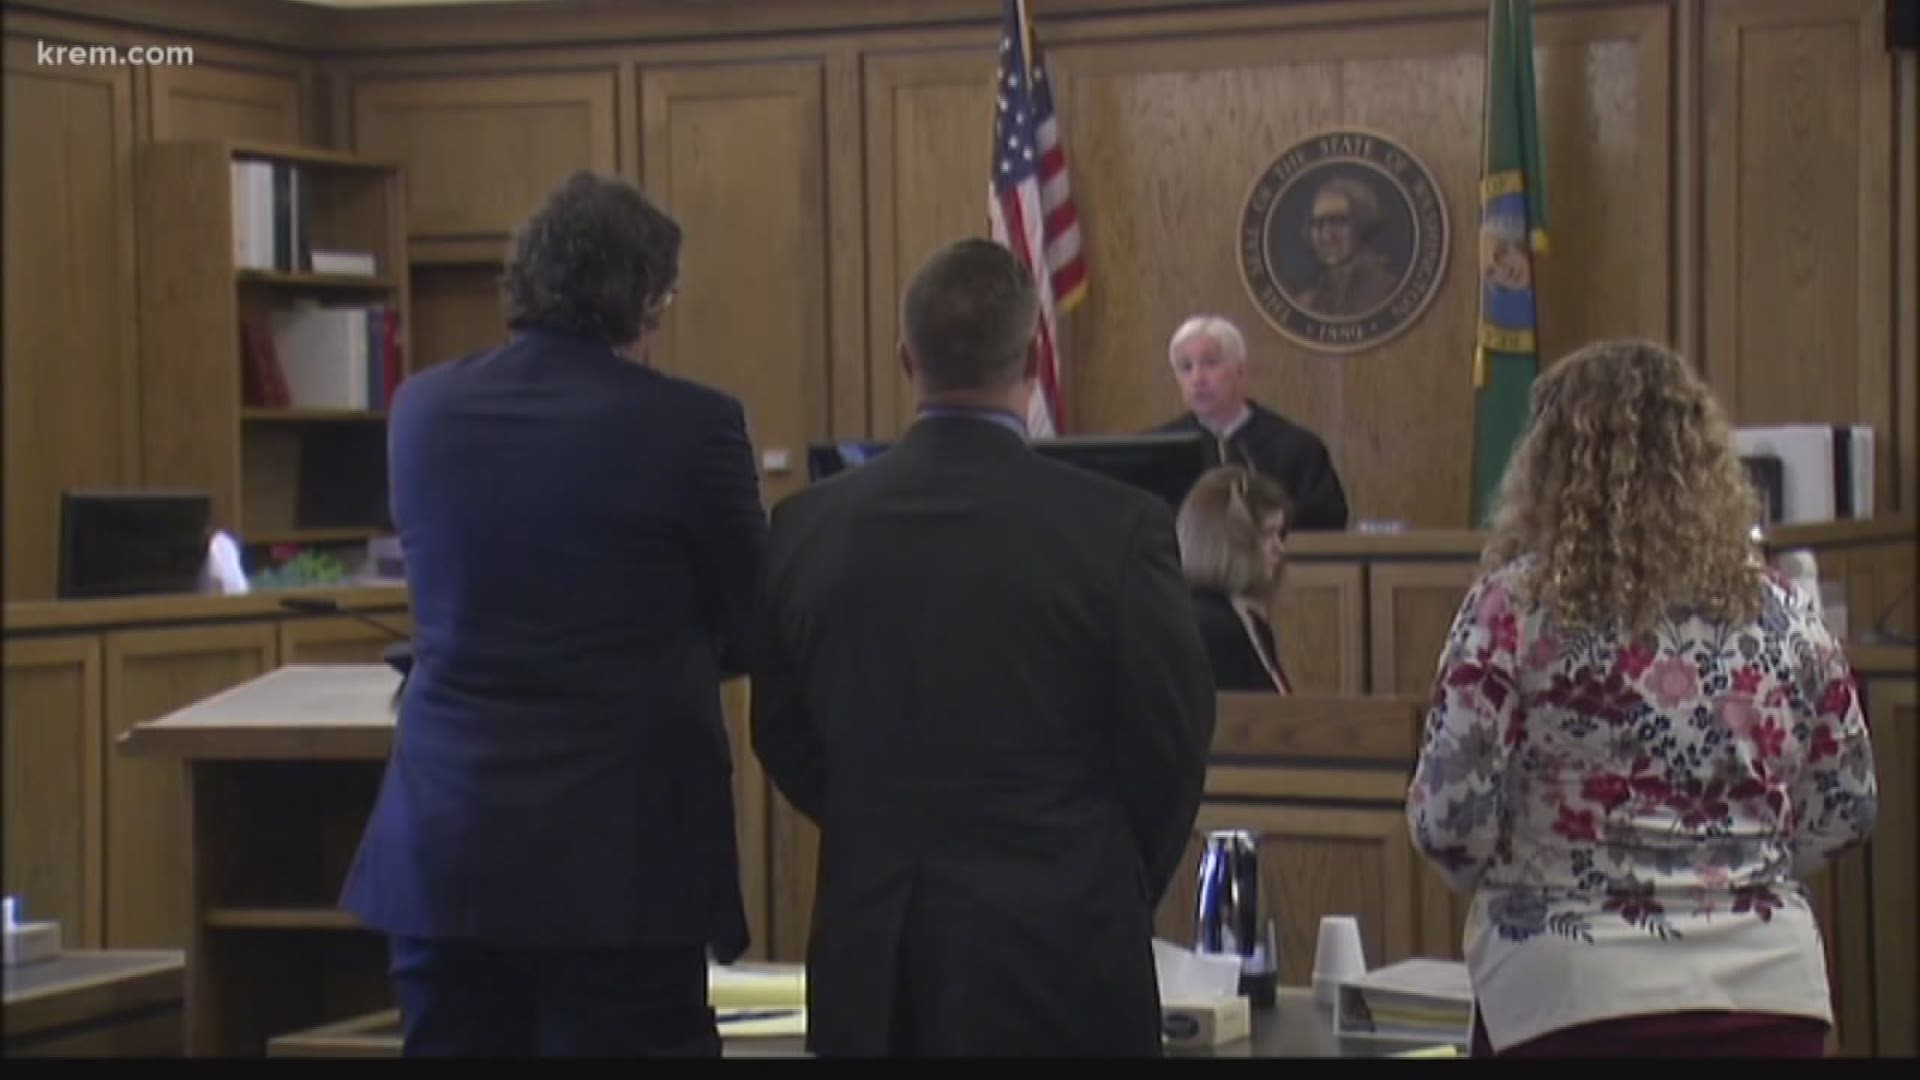 KREM 2's Amanda Roley was in court today where emotions from both sides of the court room ran high.